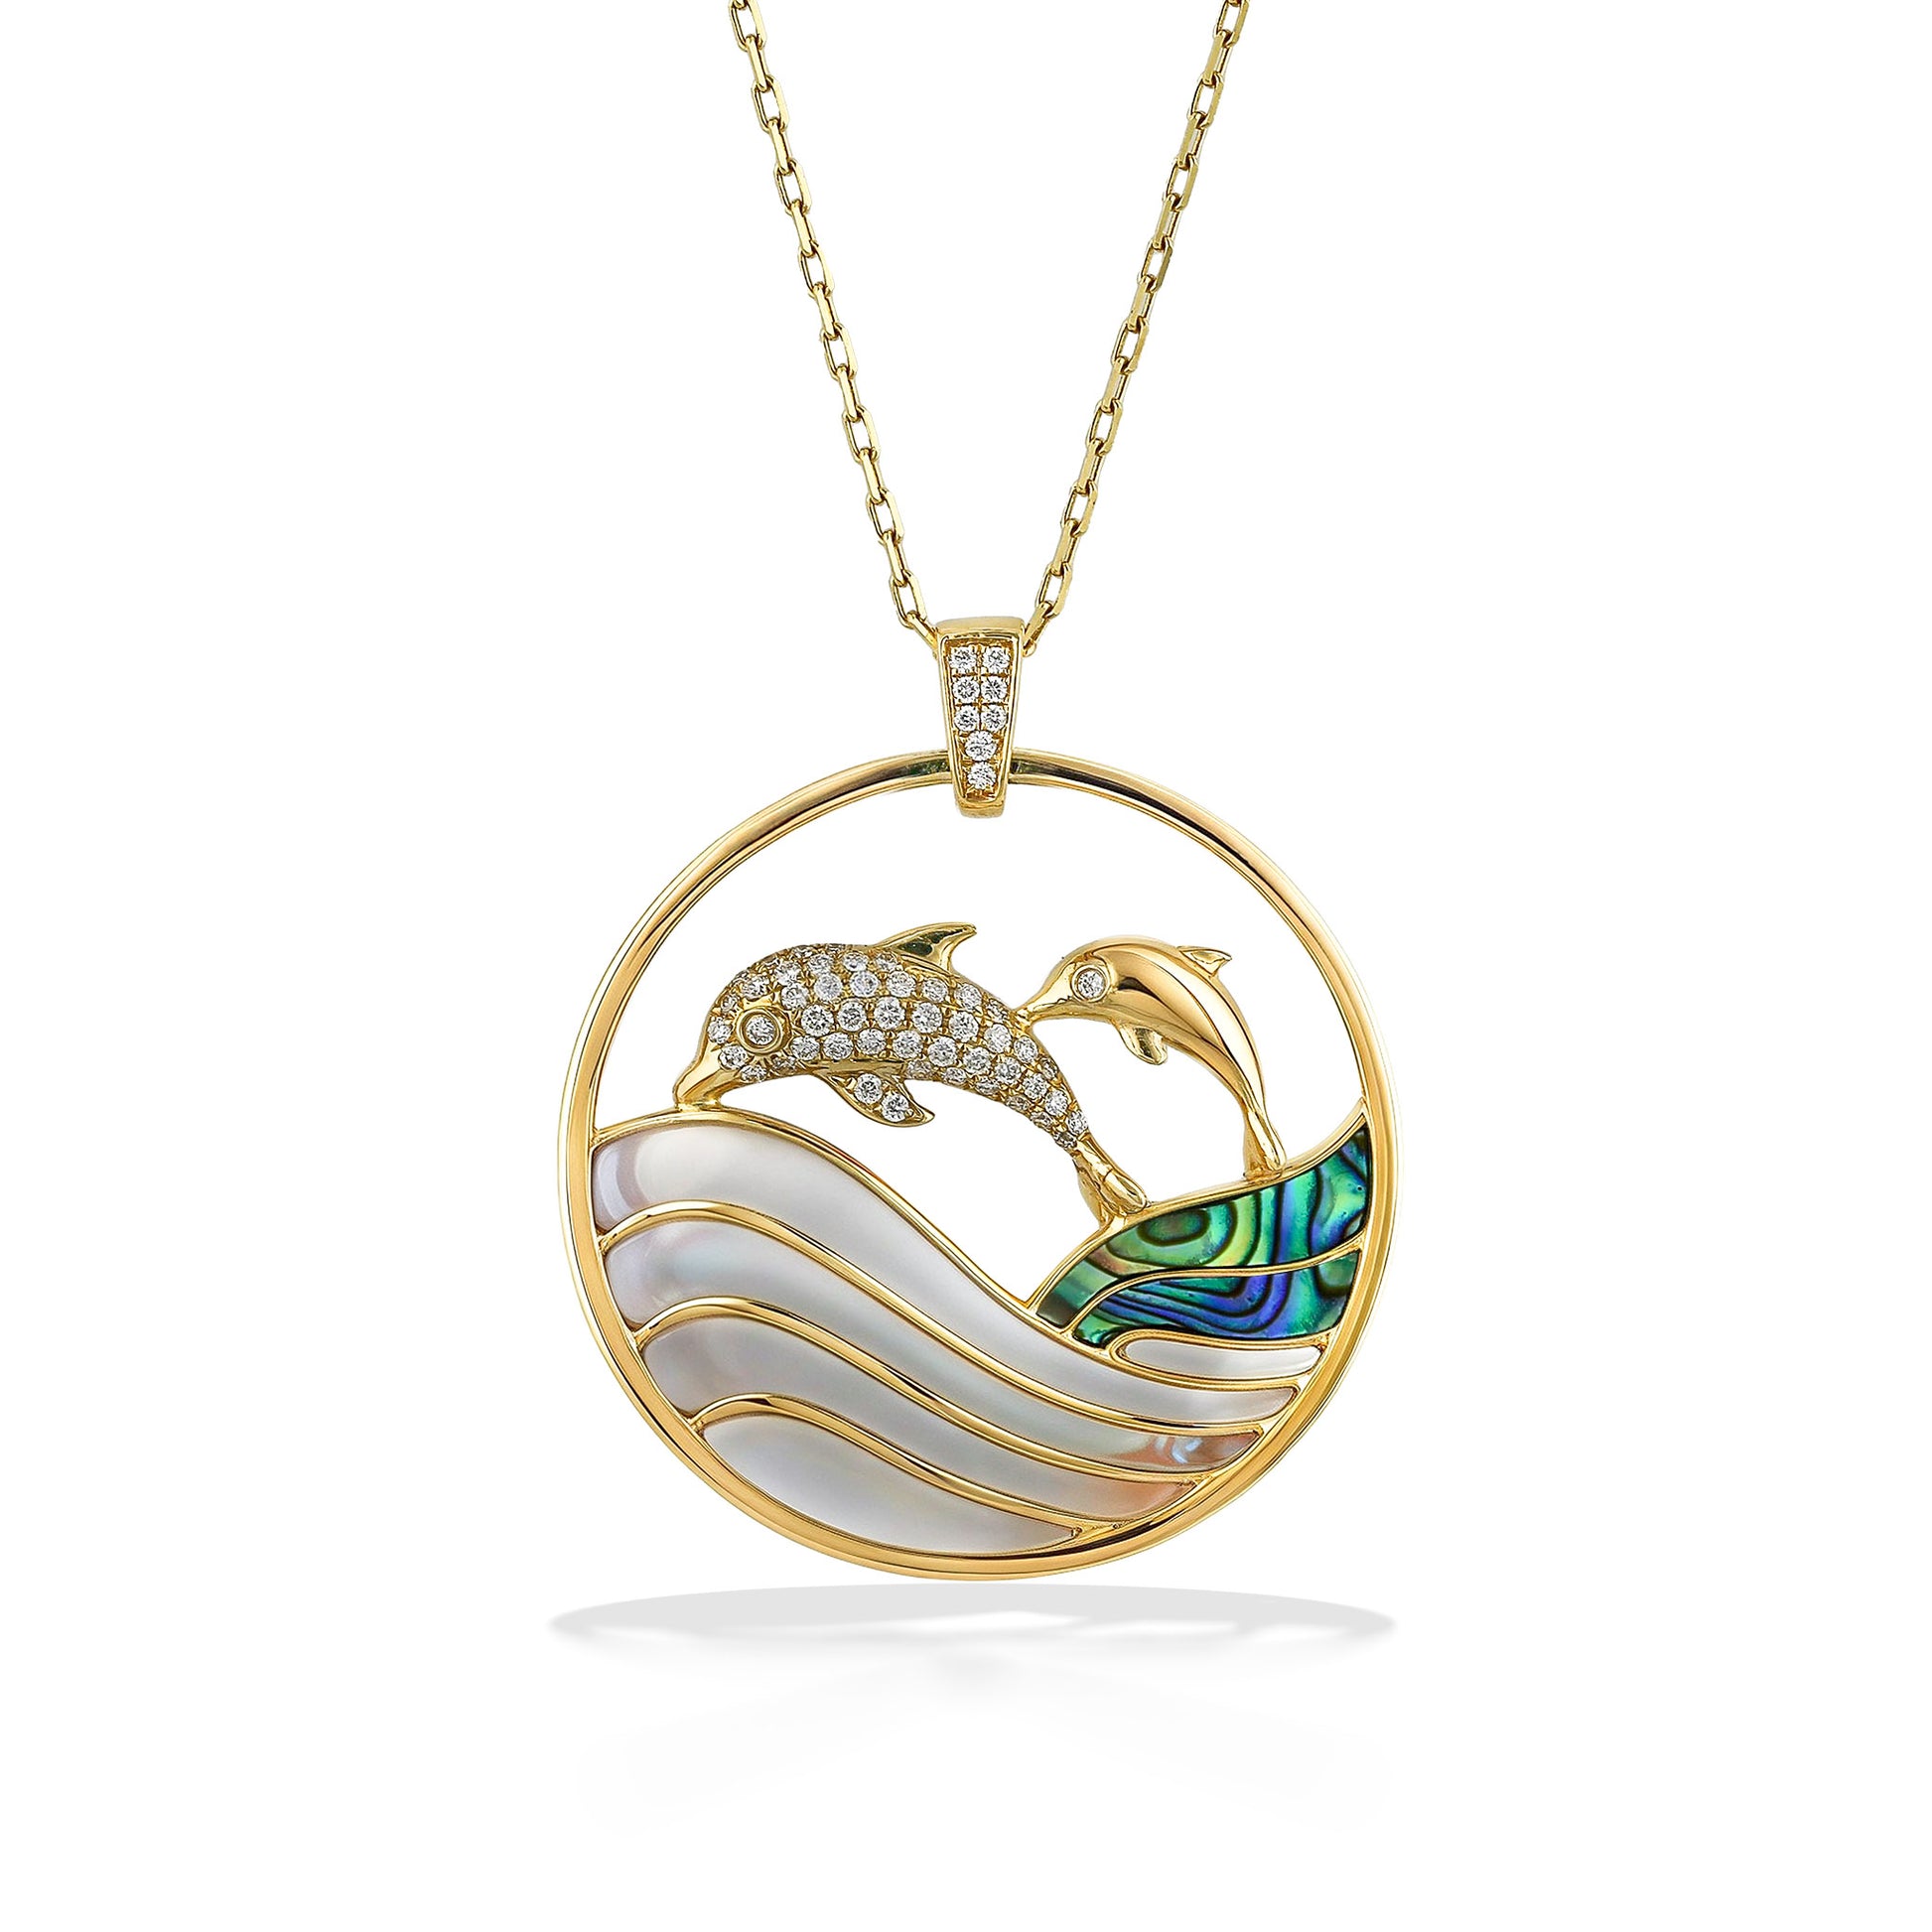 770424 - 14K Yellow Gold - Frederic Sage Dolphin Pendant